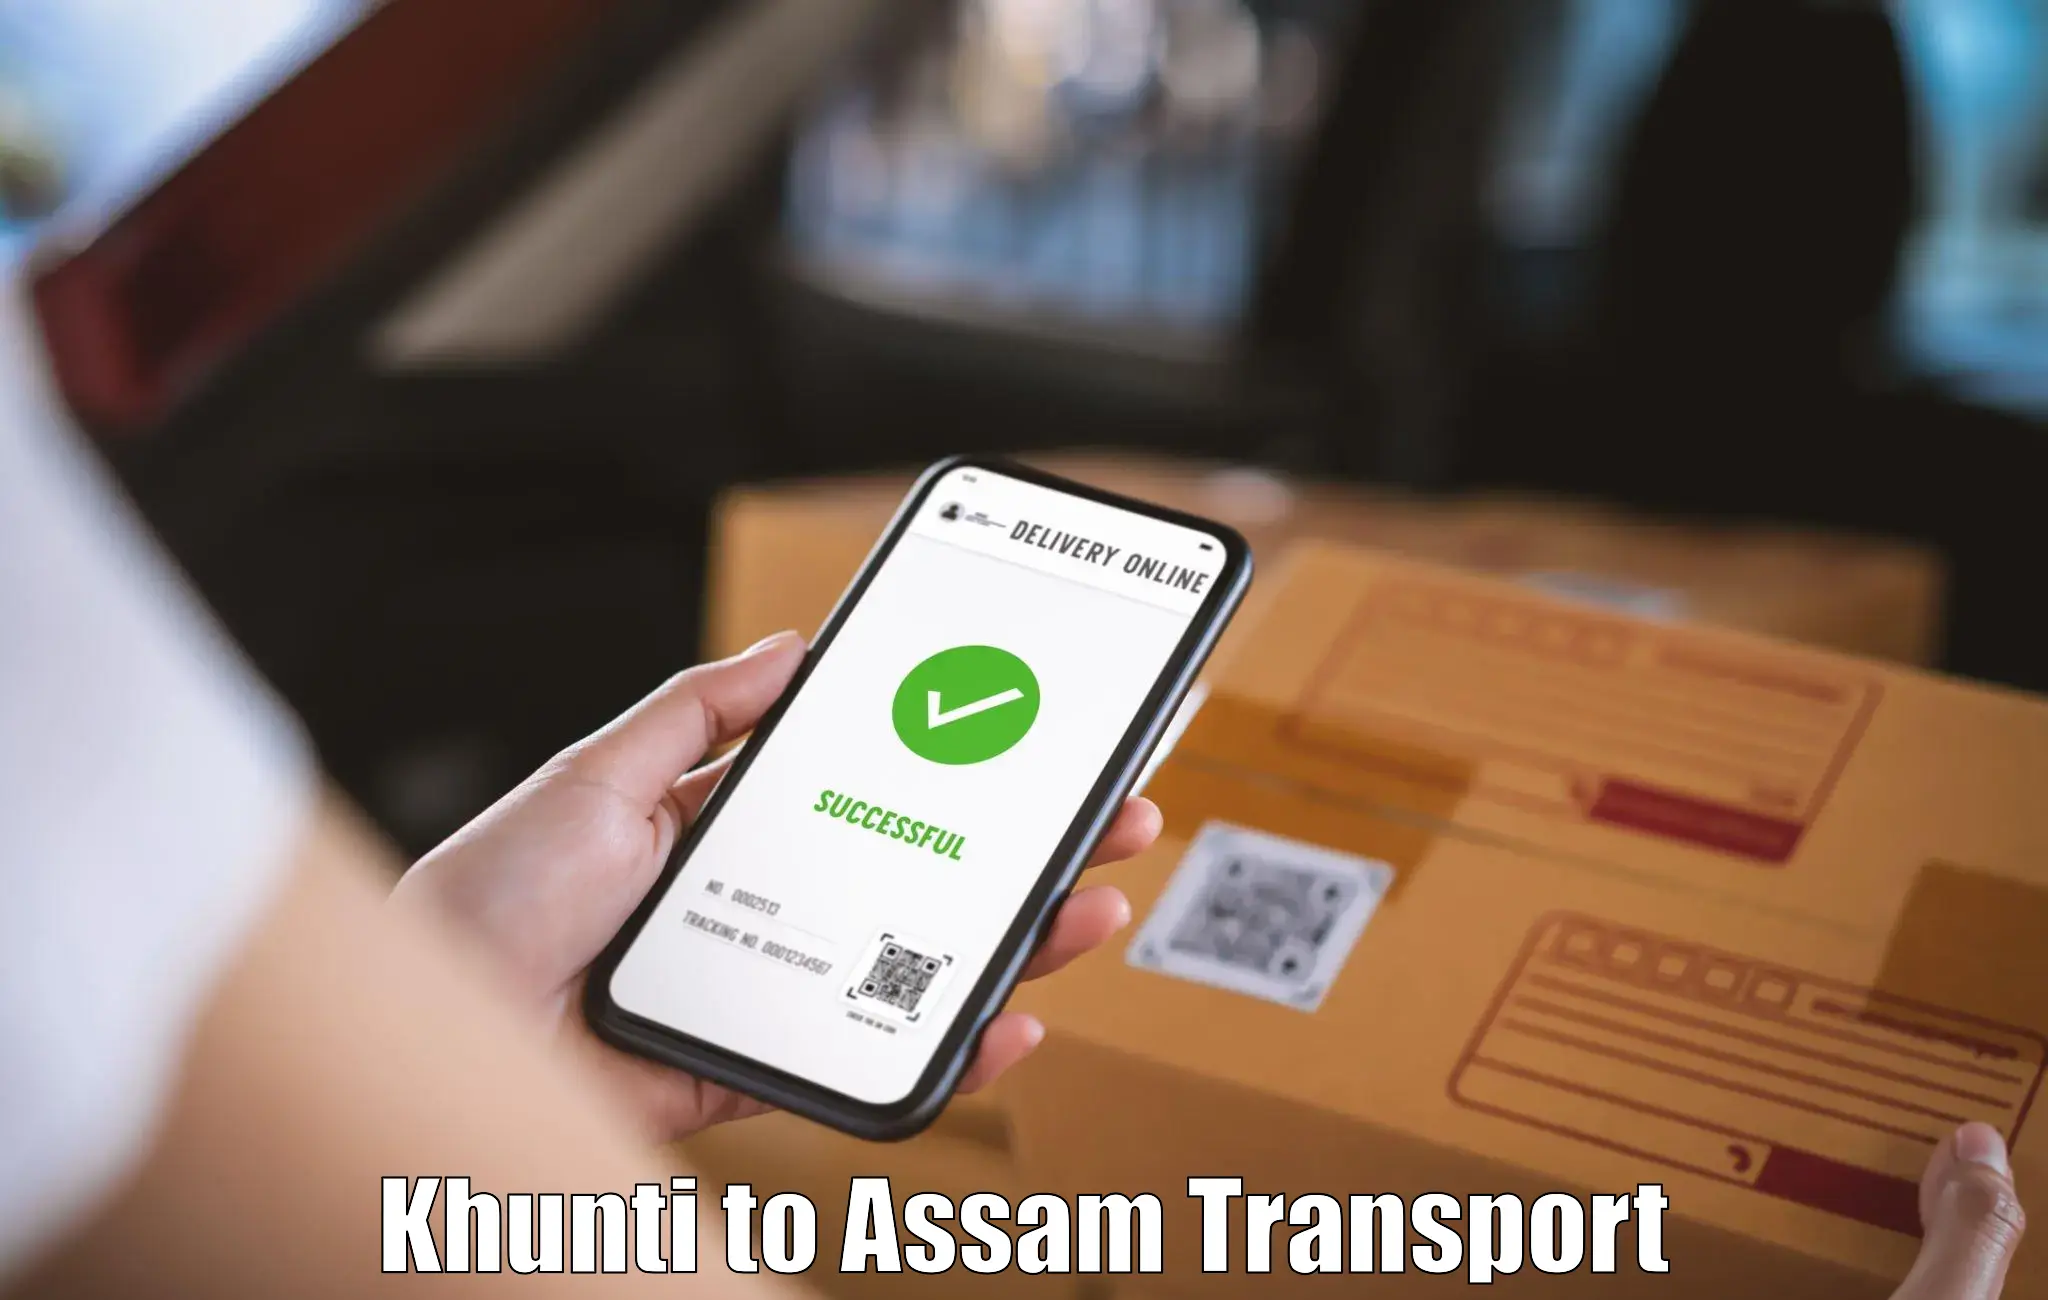 Nearest transport service in Khunti to Mariani